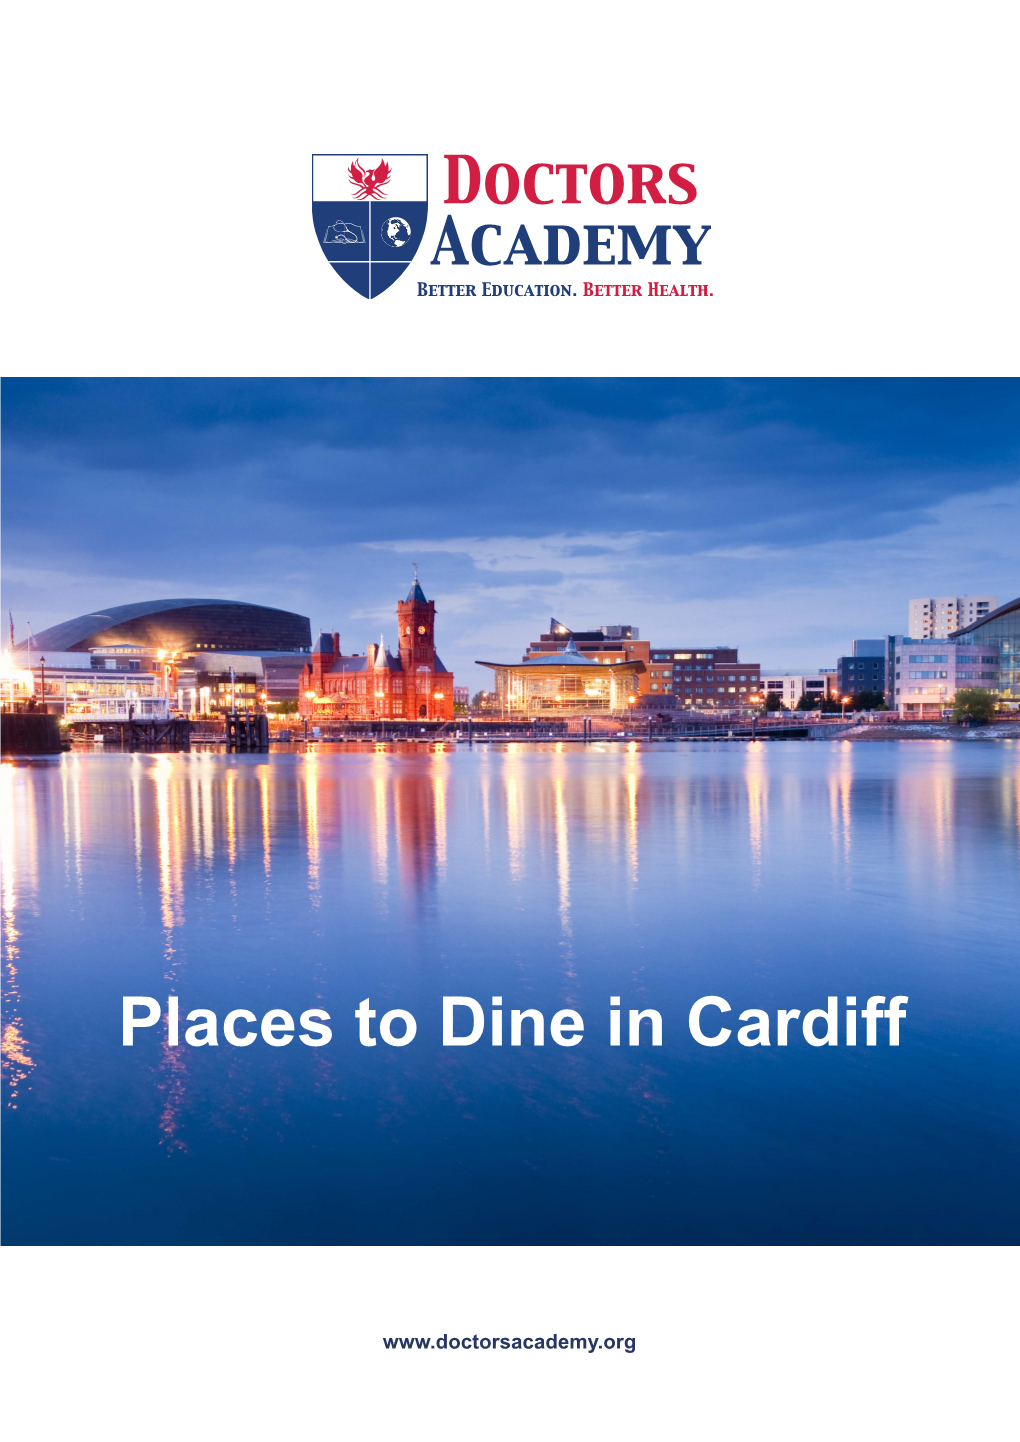 Places to Dine in Cardiff